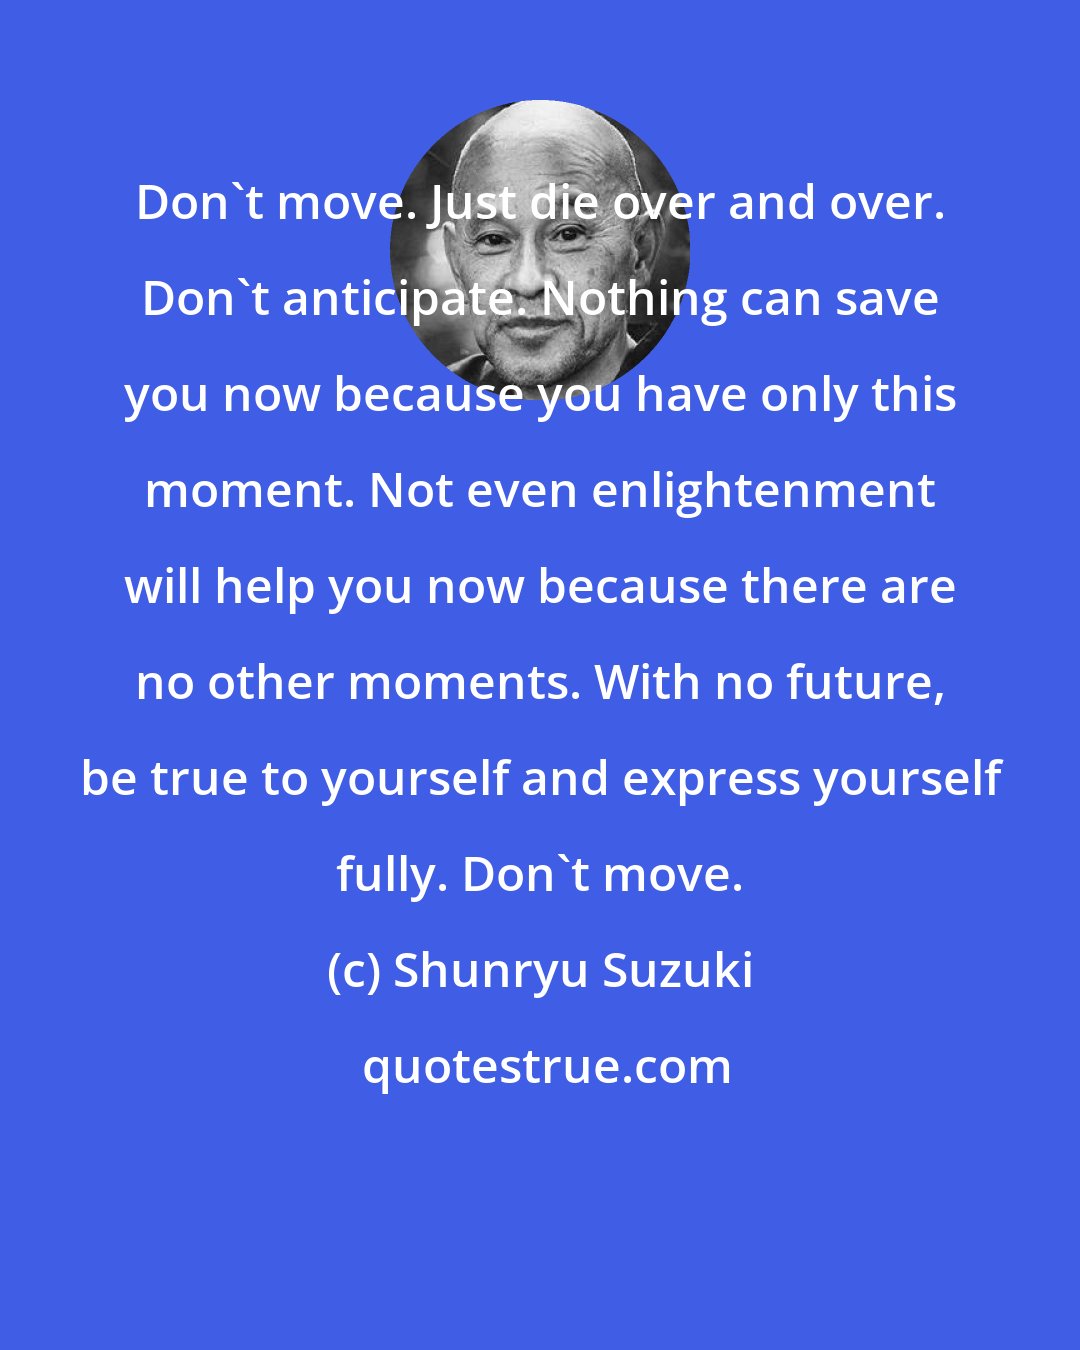 Shunryu Suzuki: Don't move. Just die over and over. Don't anticipate. Nothing can save you now because you have only this moment. Not even enlightenment will help you now because there are no other moments. With no future, be true to yourself and express yourself fully. Don't move.